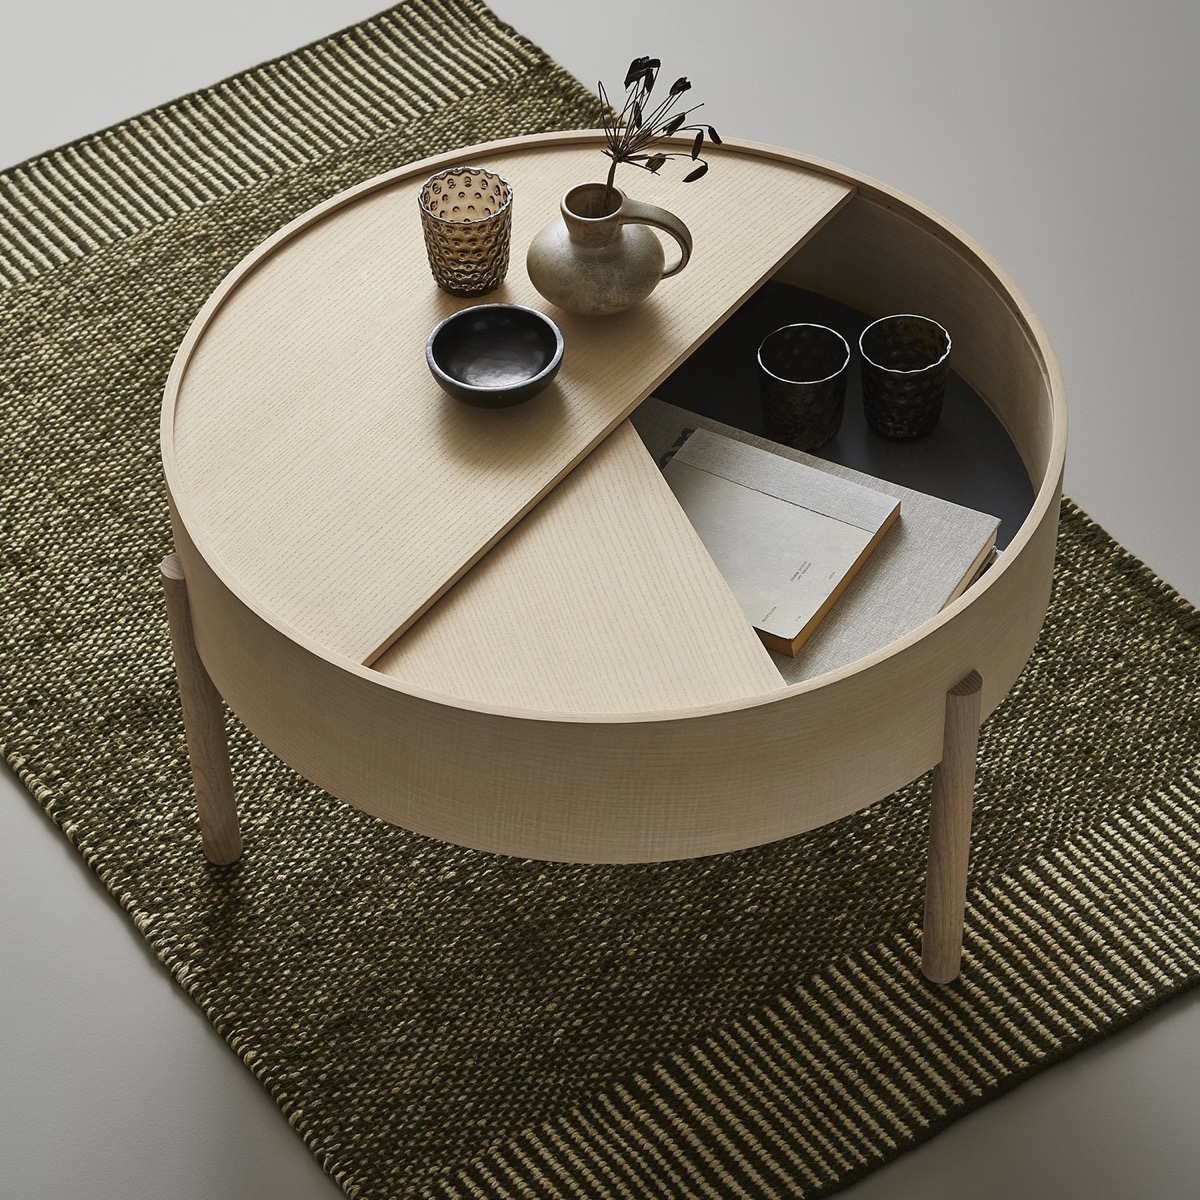 https://www.home-designing.com/wp-content/uploads/2019/07/Designer-Round-Coffee-Table-With-Storage-Unfinished-Wood-3-Legs.jpg